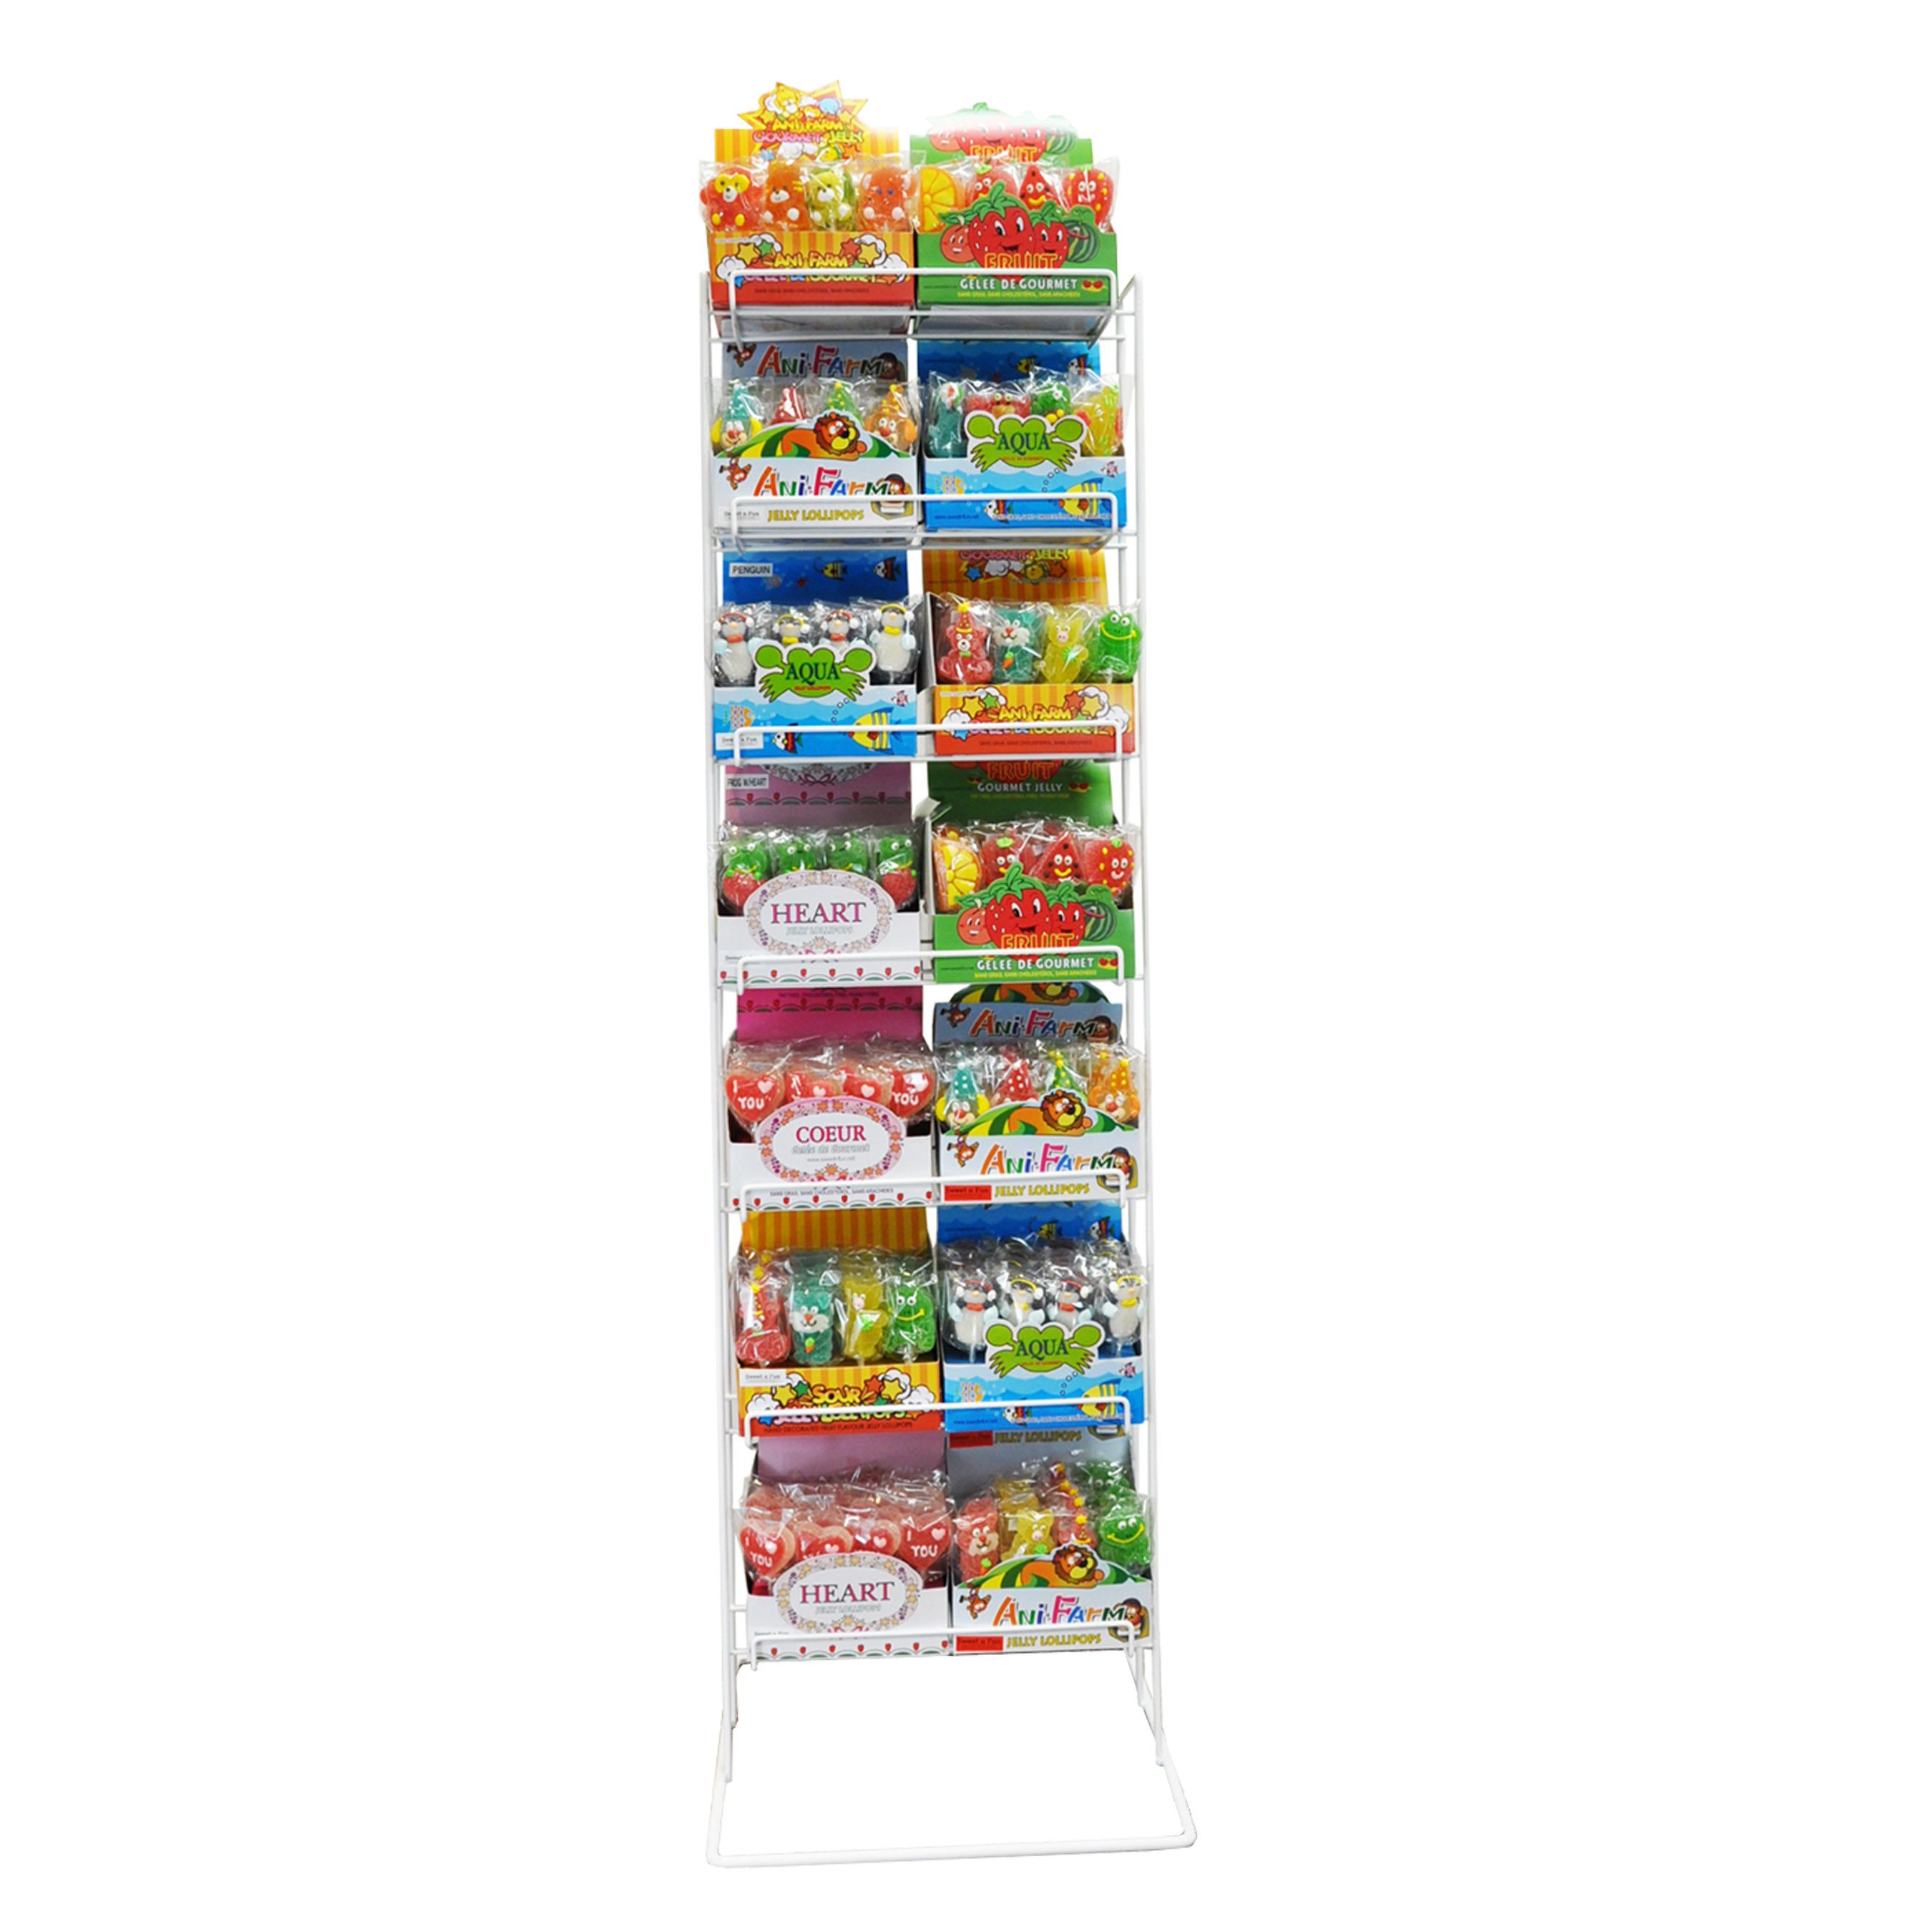 Display methods for all our candy products. floor standing or counter top.